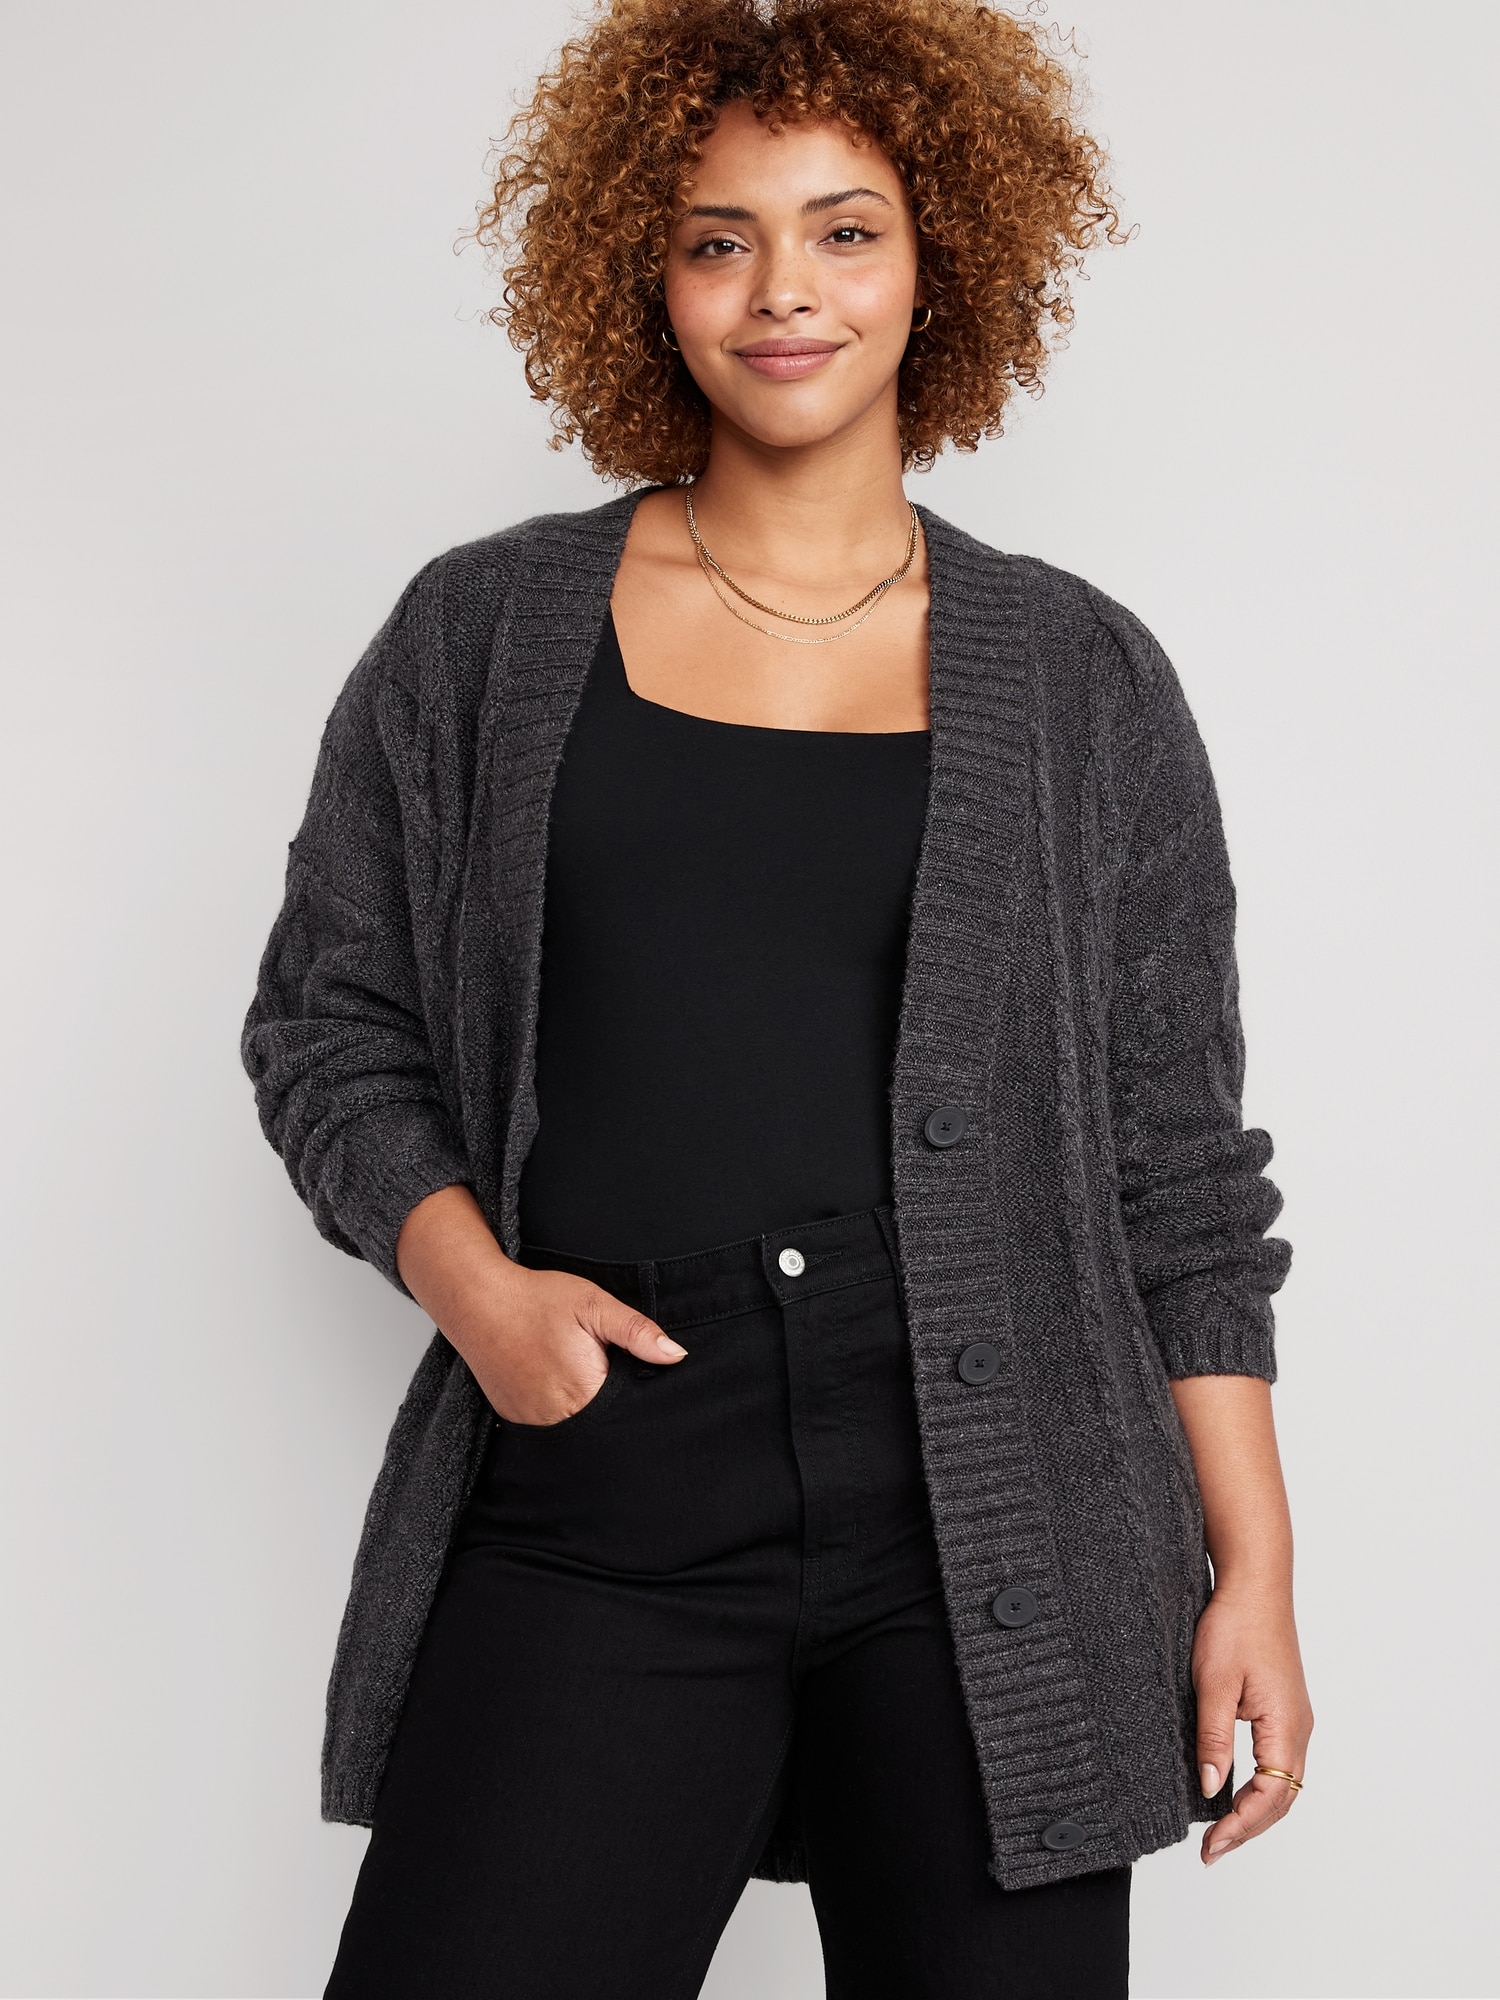 Sweater Women Navy | for Oversized Old Cardigan Cable-Knit Chunky